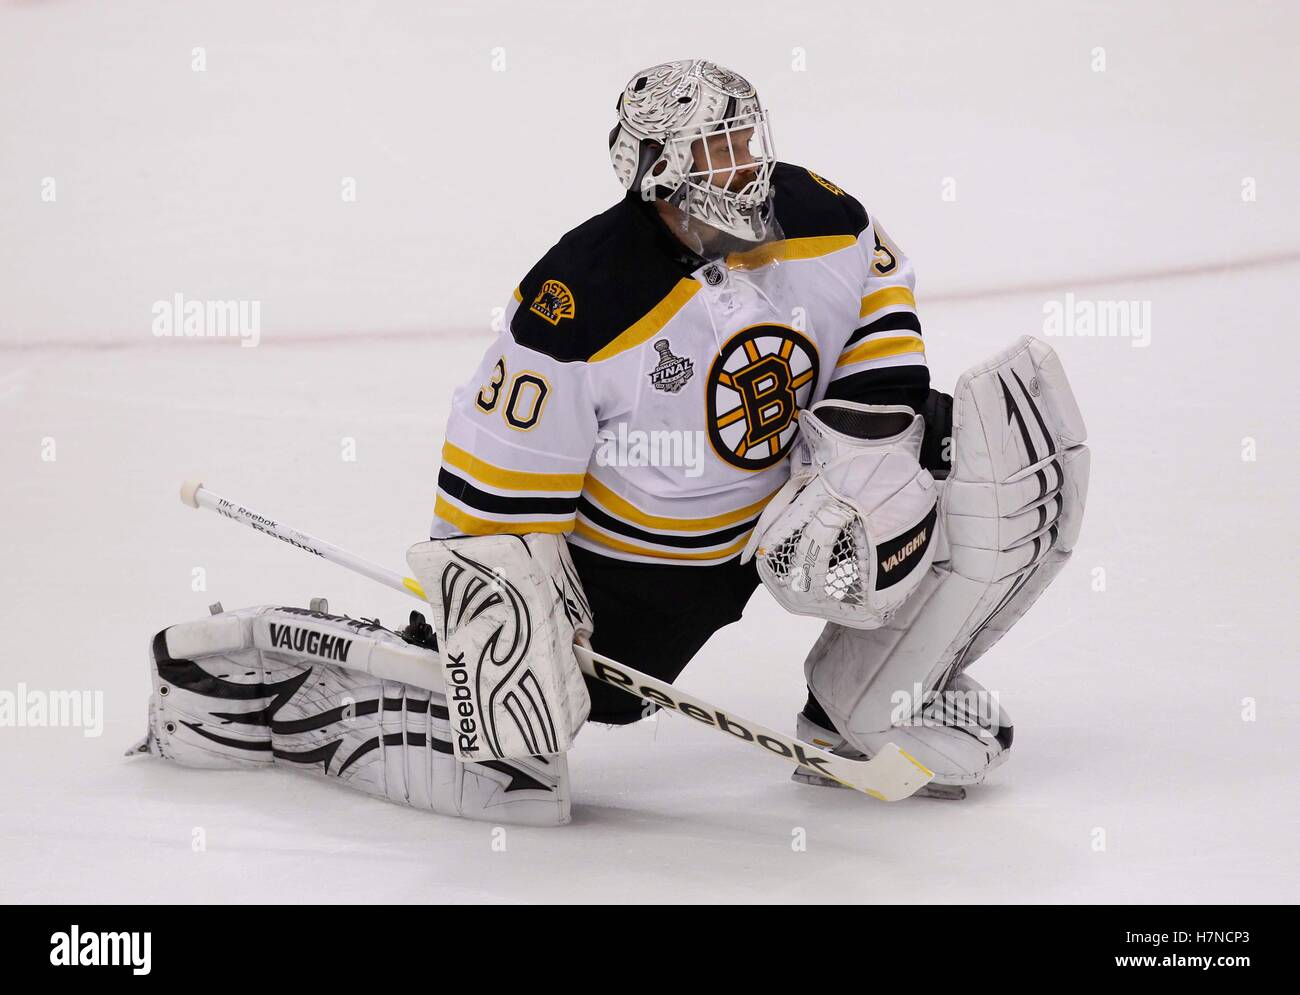 Tim Thomas gets his fifth shutout, Bruins top Flyers ironically 3